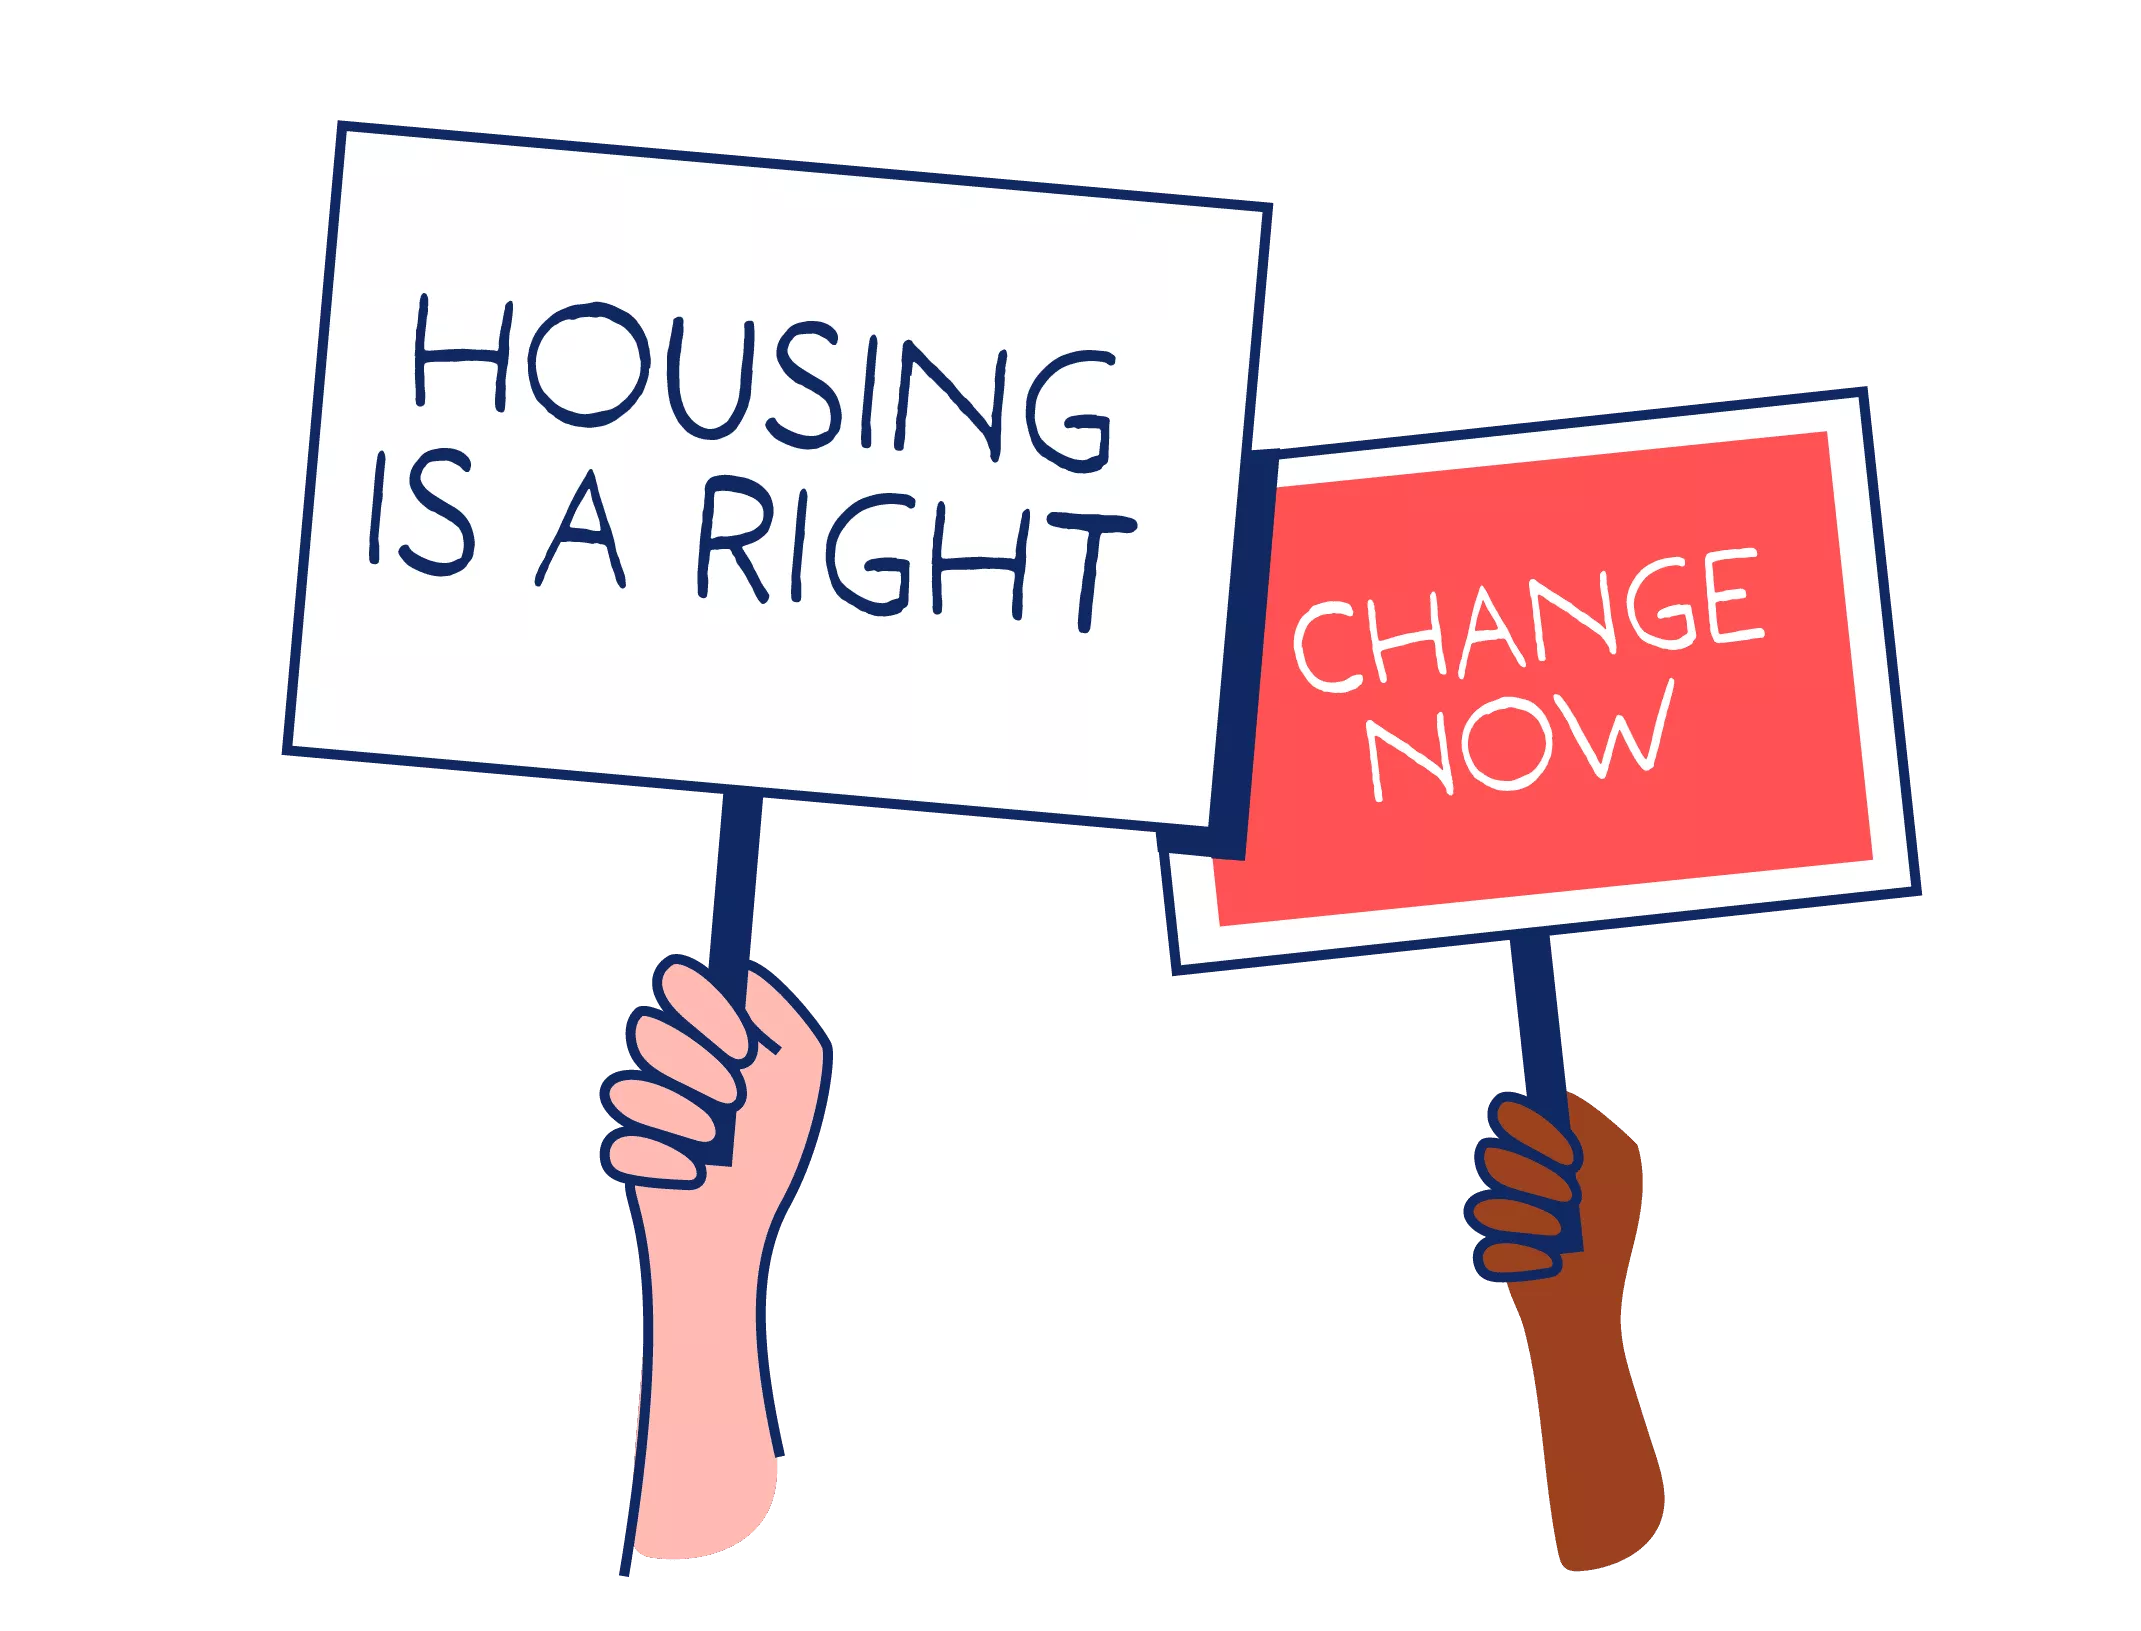 An illustration of two hands holding protest signs that read 'Housing is a right' and 'Change now.'